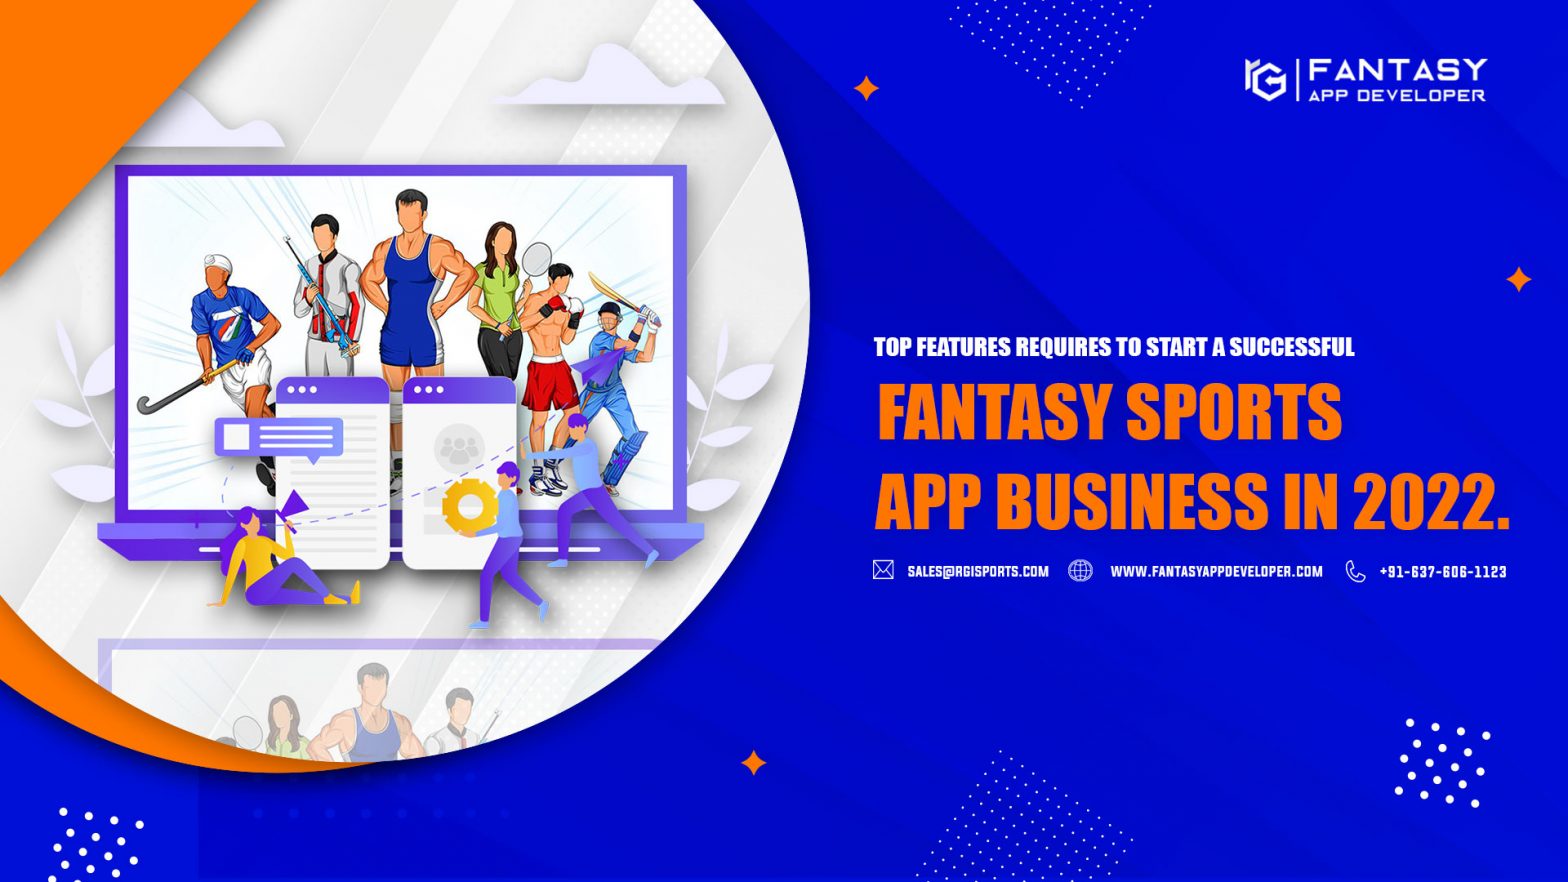 Top Features Requires To Start A Successful Fantasy Sports App Business In 2022